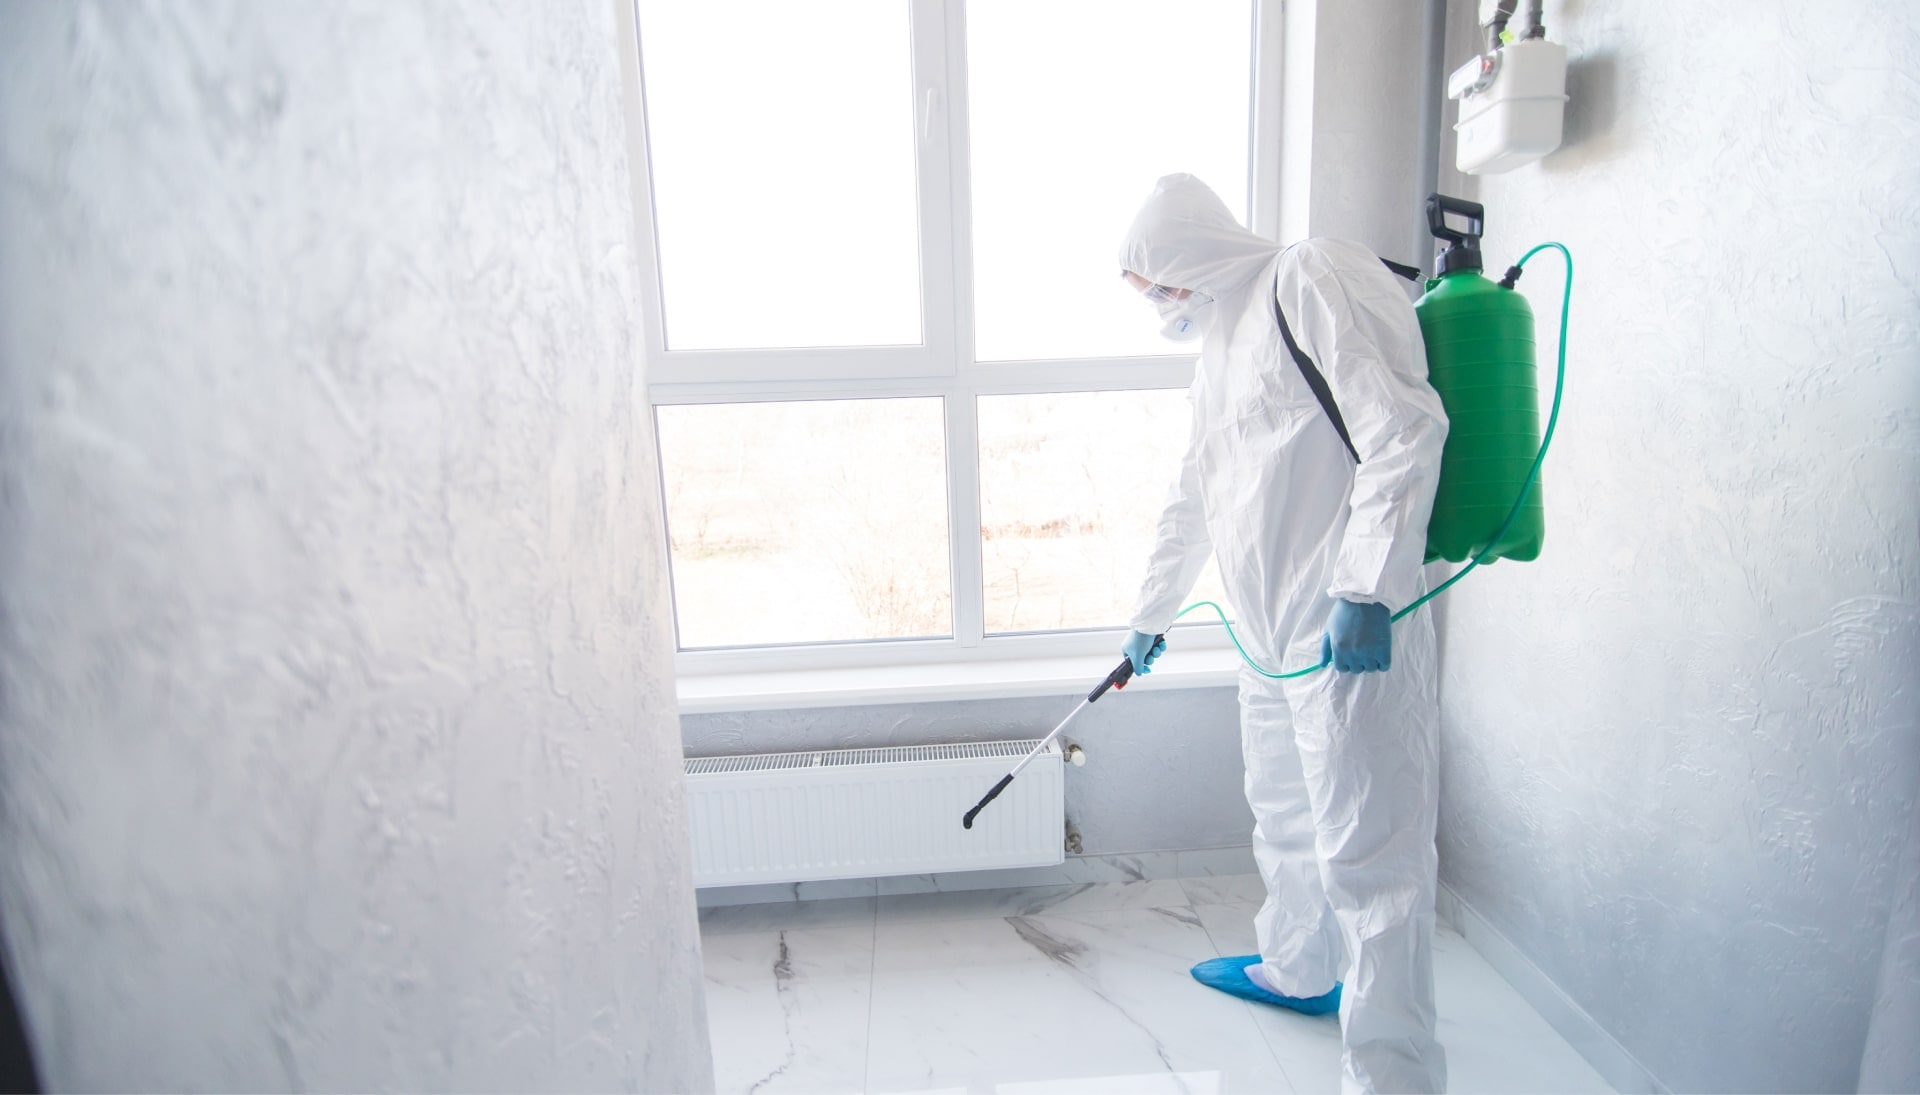 We provide the highest-quality mold inspection, testing, and removal services in the Maryville, Tennessee area.